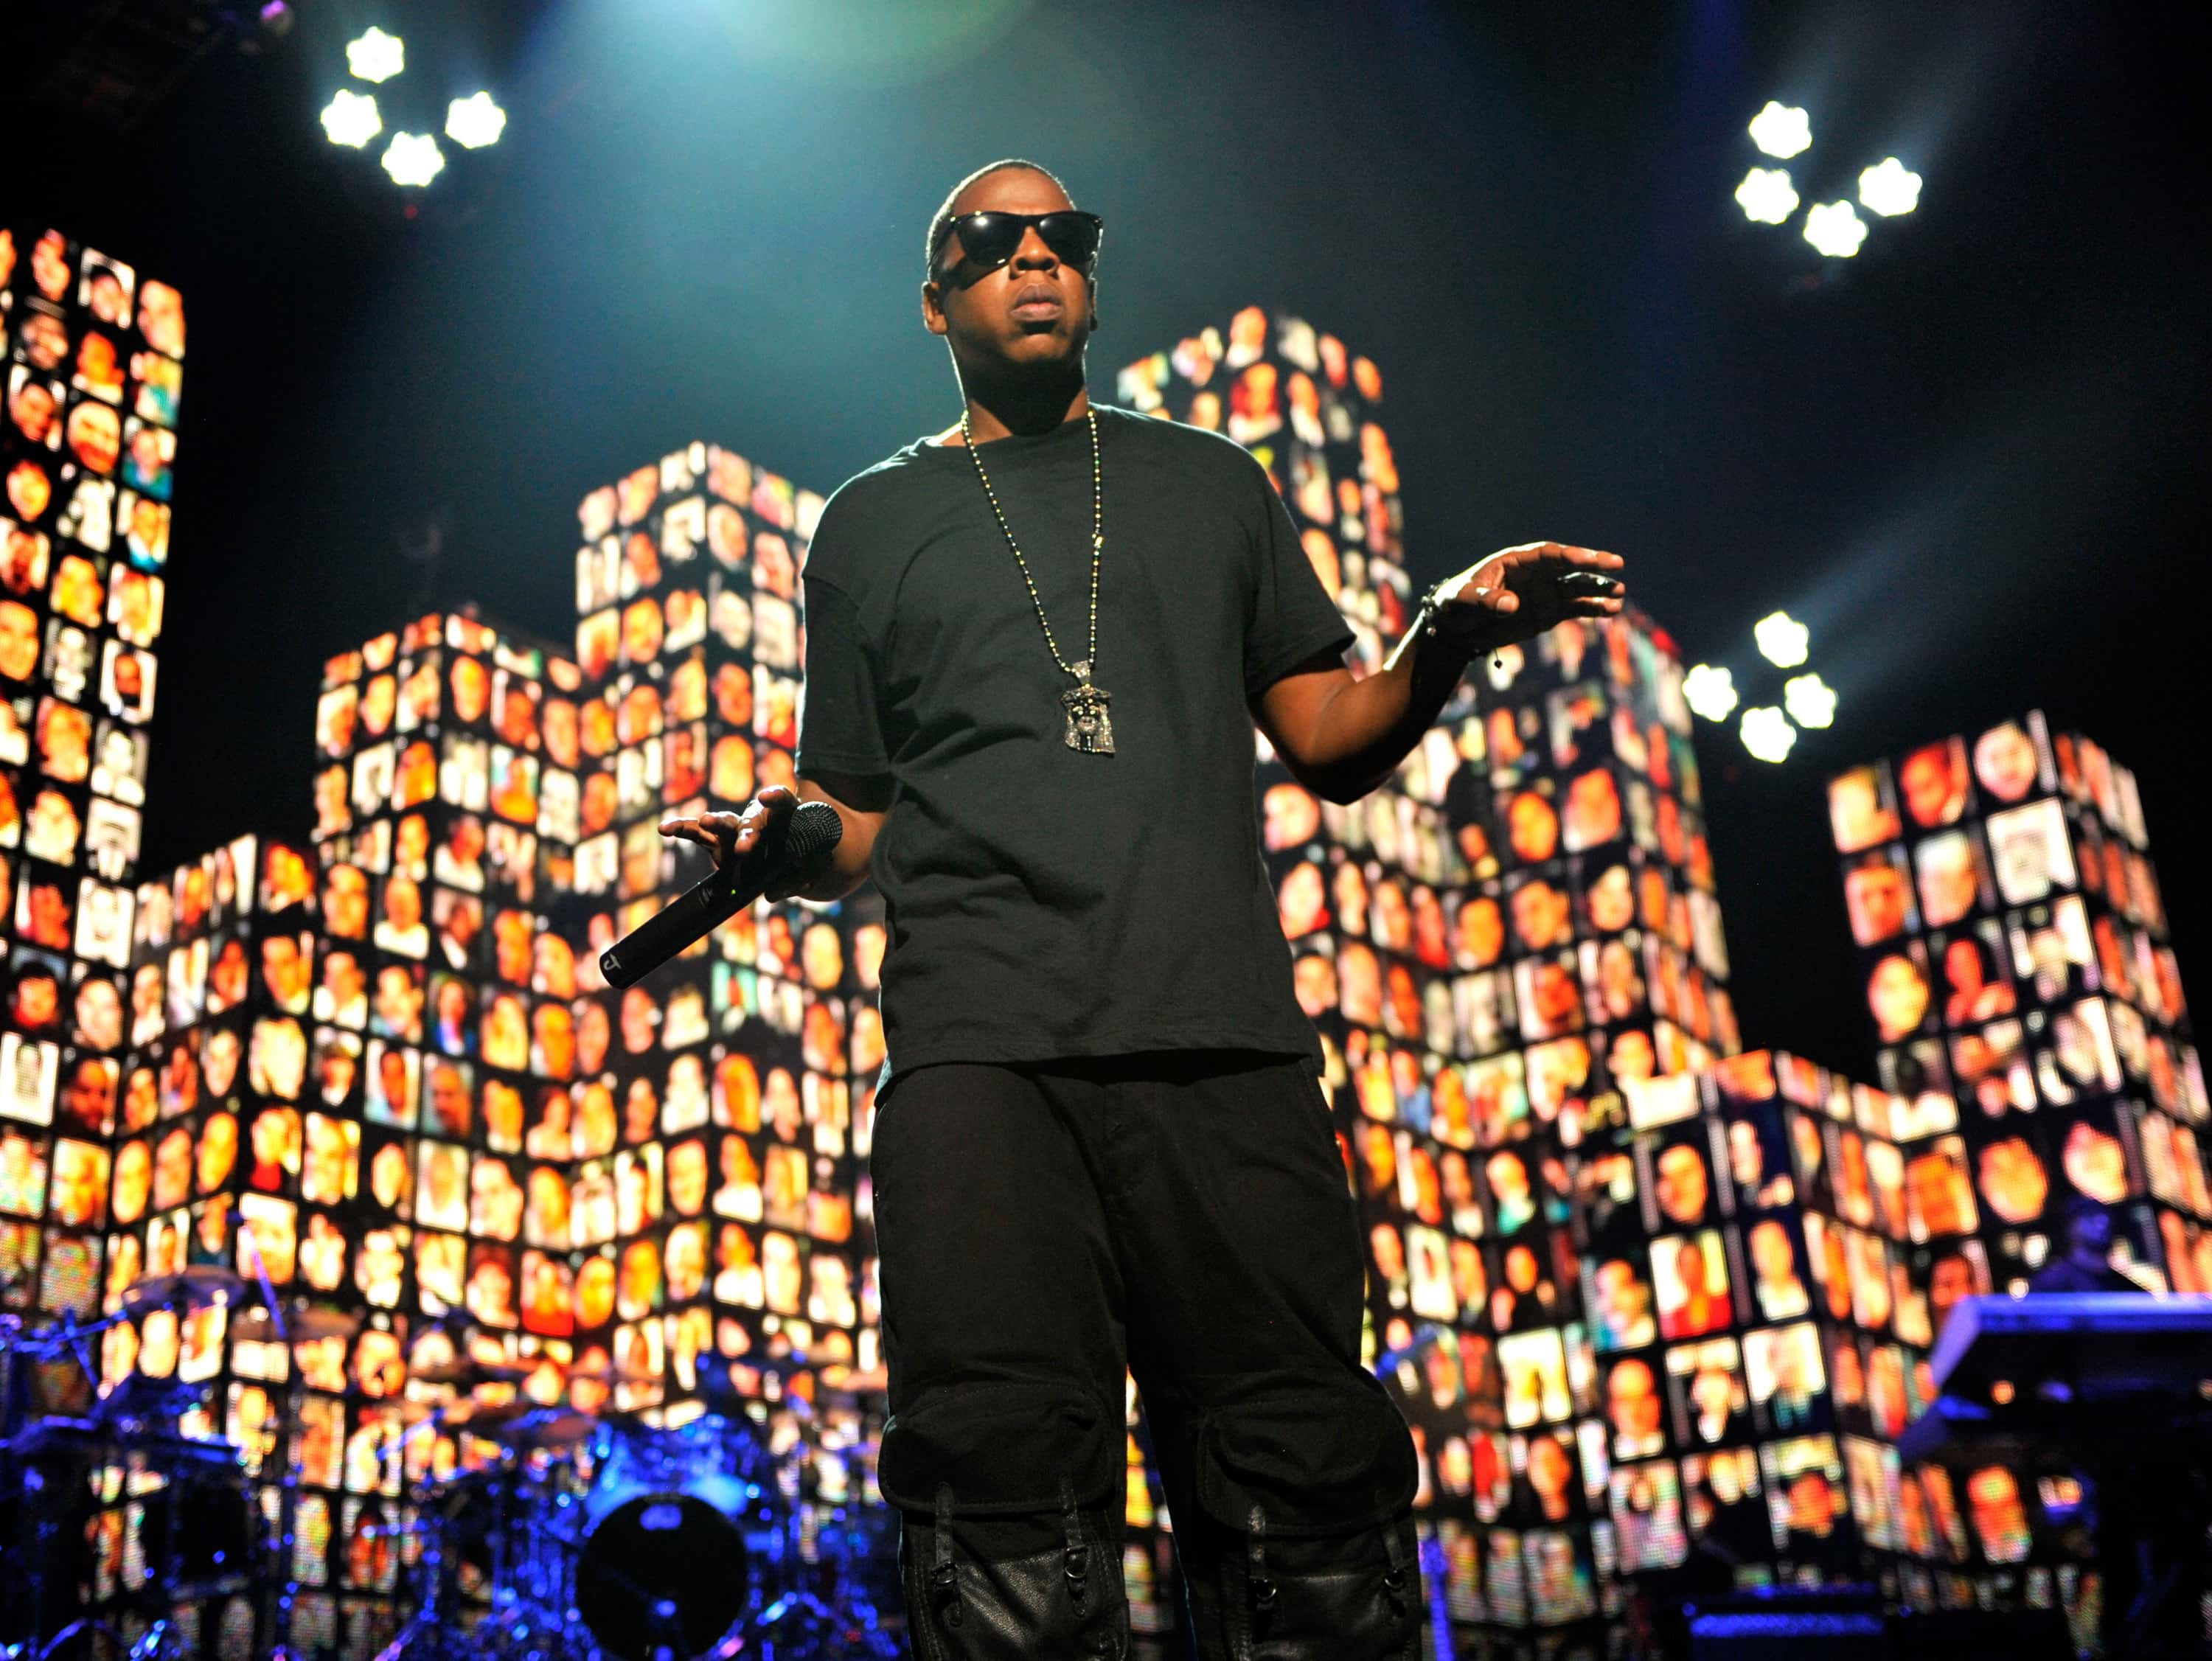 Shawn 'Jay-Z' Carter 'Answers the Call' September 11th Benefit Concert.